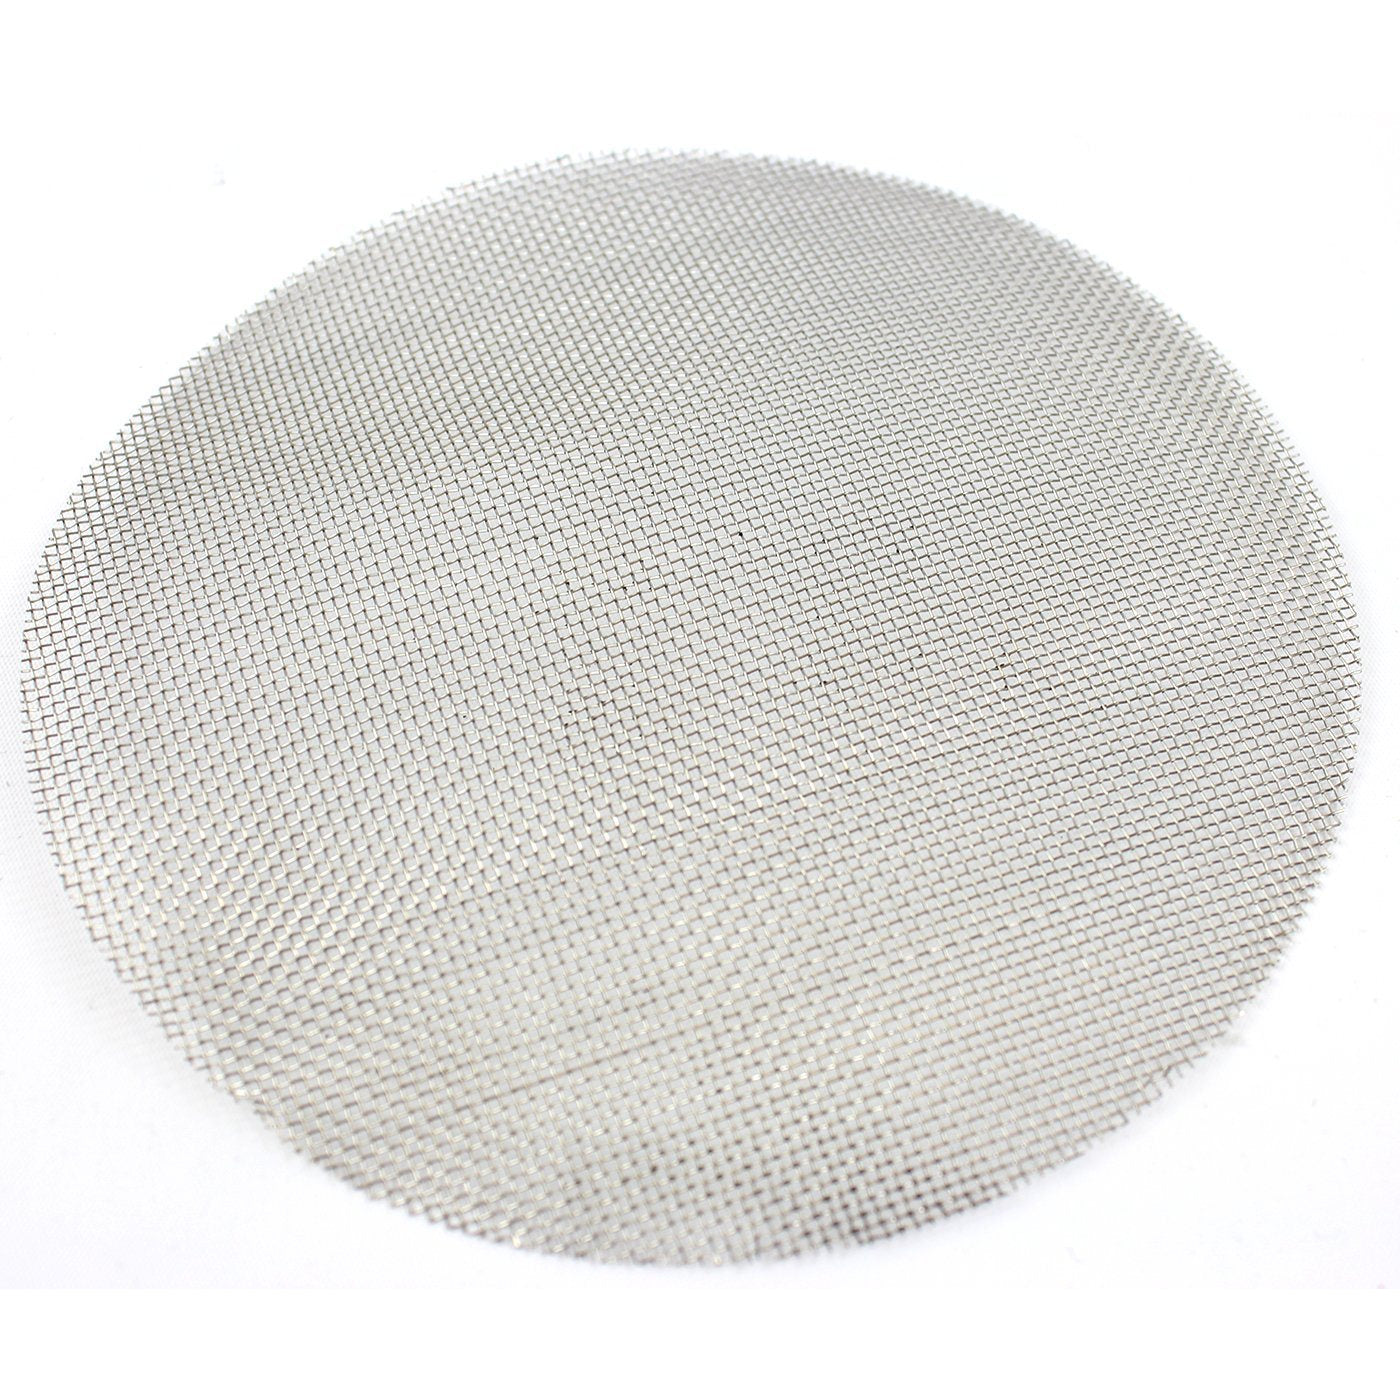 Pre-Cut Stainless Steel Mesh for Tri-Clamp Filter Plates 100 Mesh (150 Micron) 1.5-inch